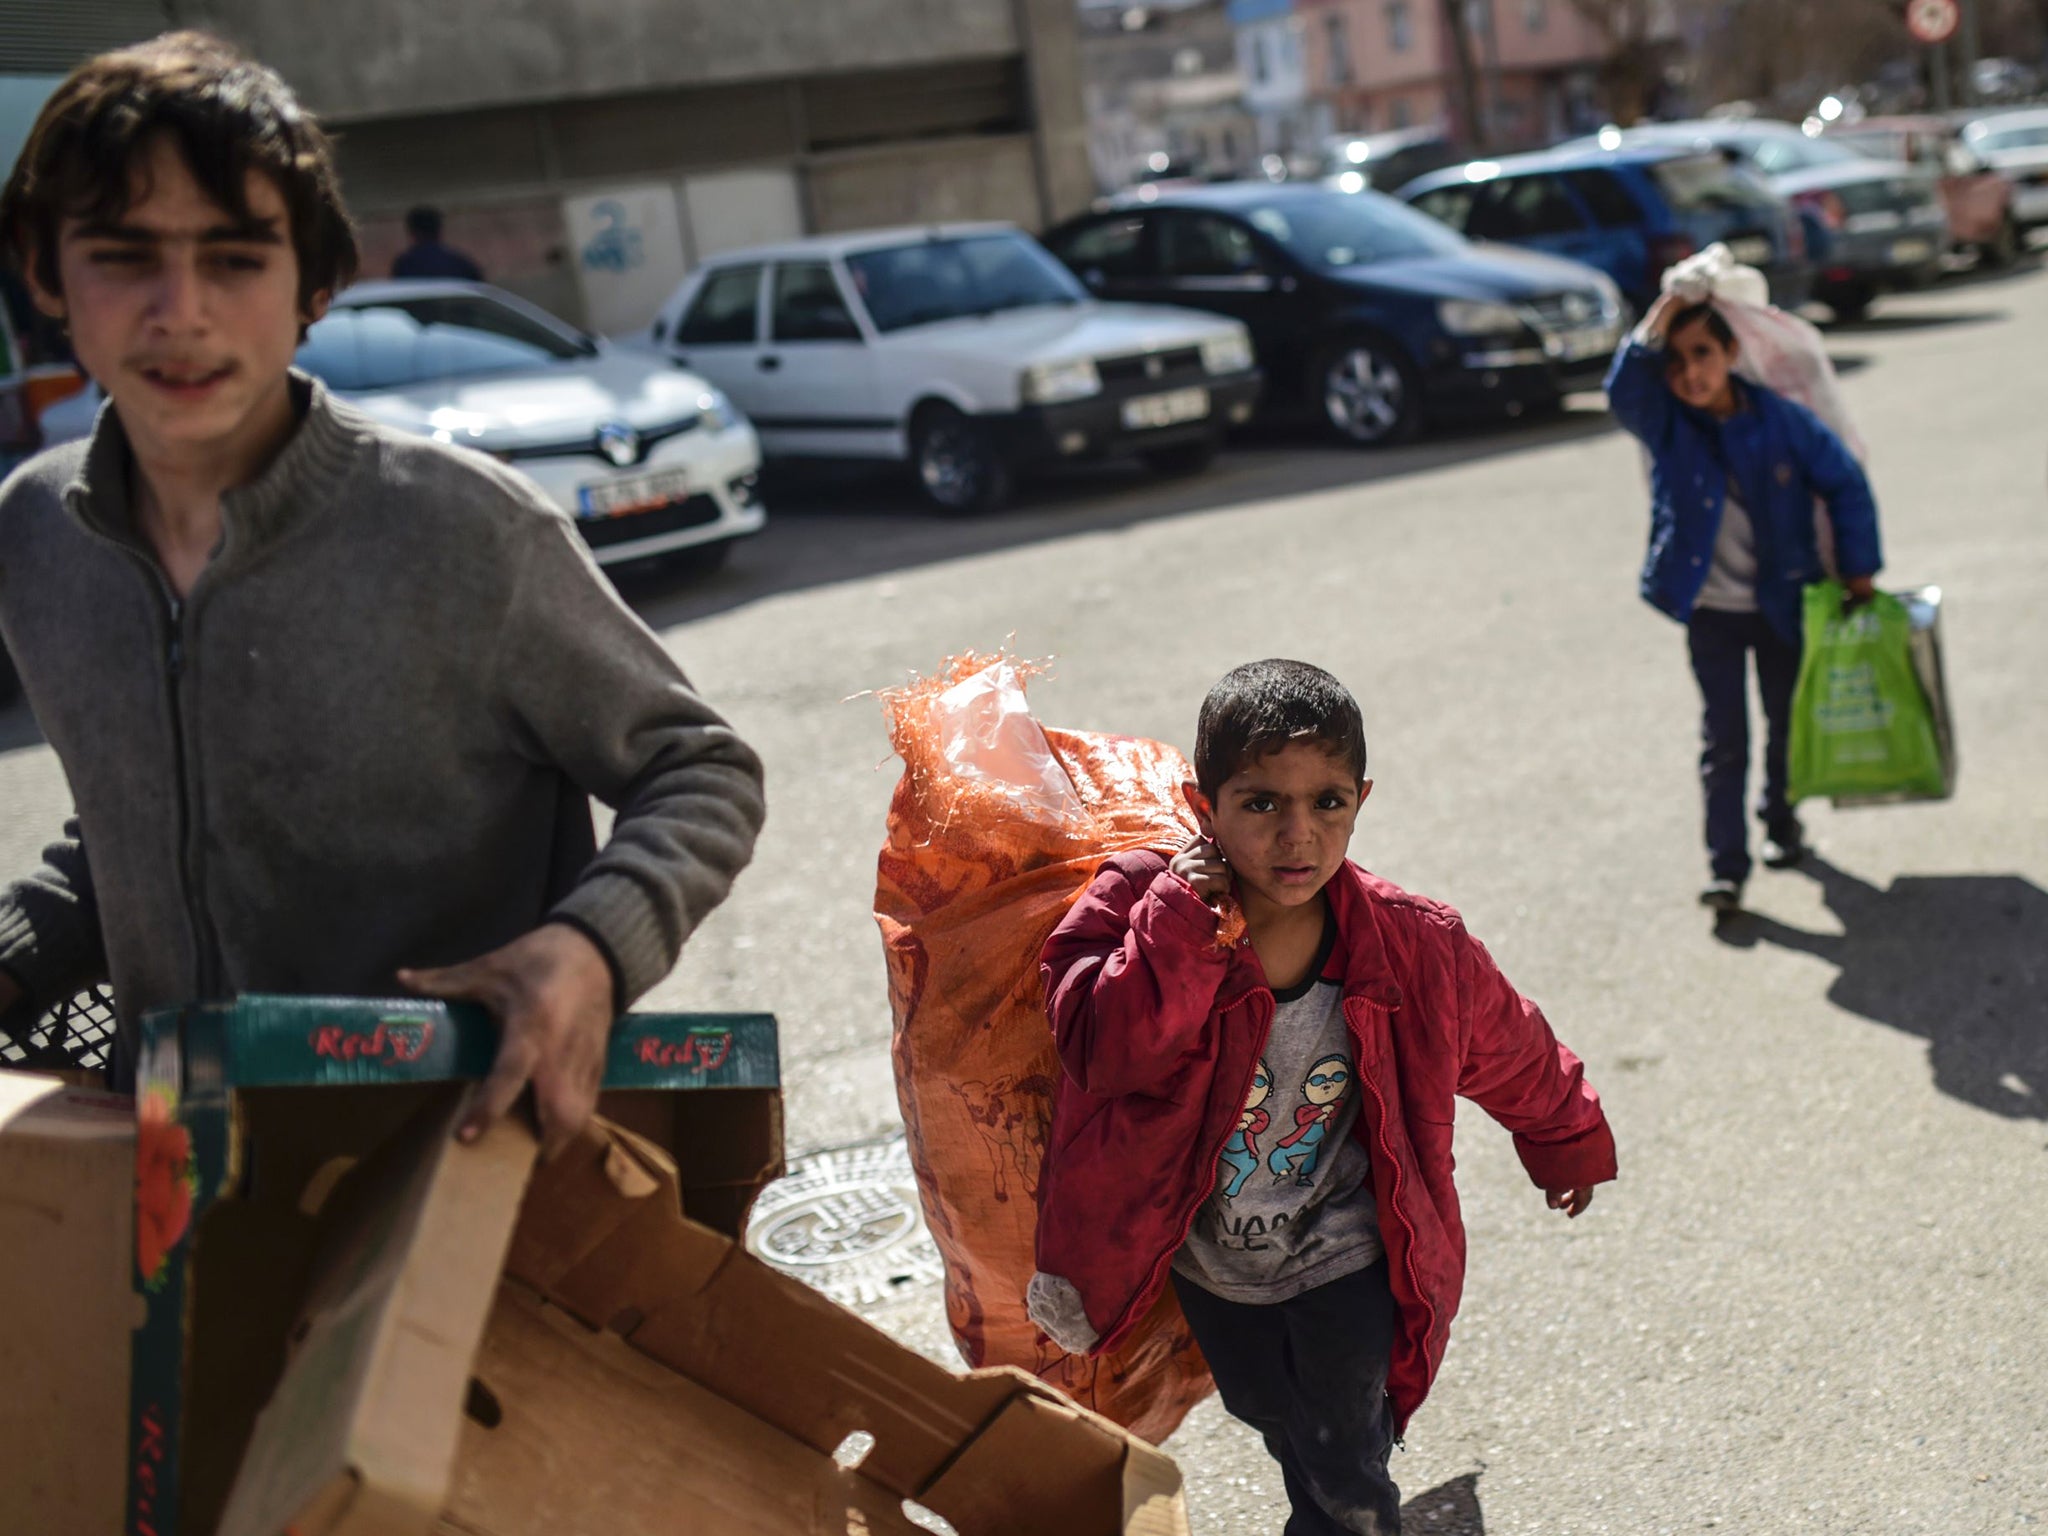 Gaziantep is home to thousands of displaced Syrian children